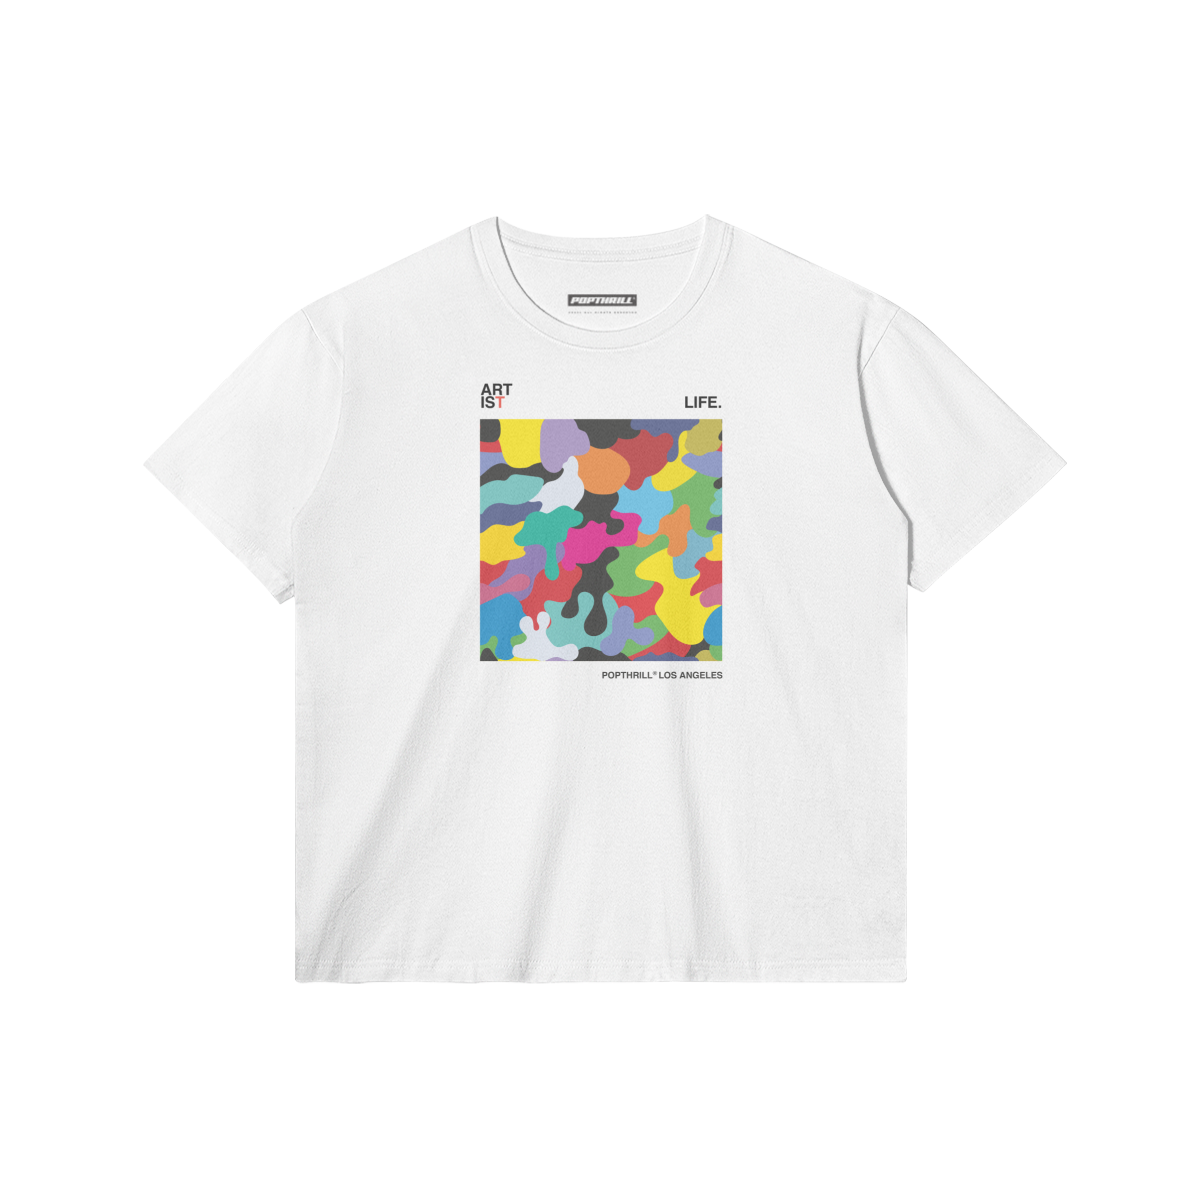 POPTHRILL® WHITE AND BEIGE CLASSIC FIT T-SHIRT - ART IS(T) LIFE